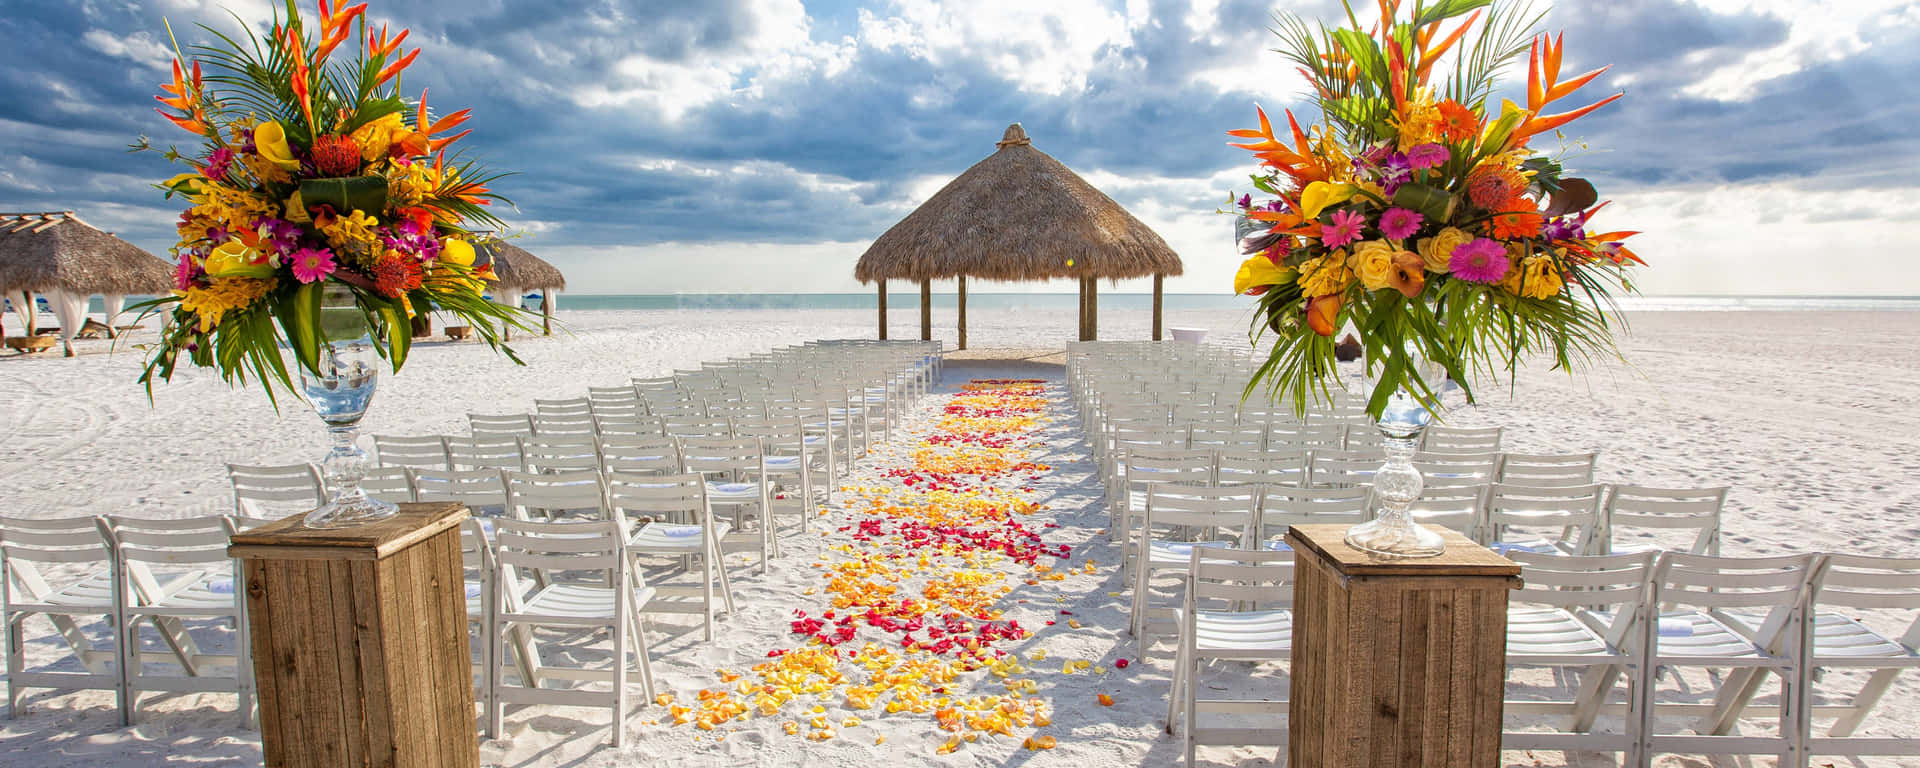 A Beach Wedding With Chairs And Flowers On The Beach